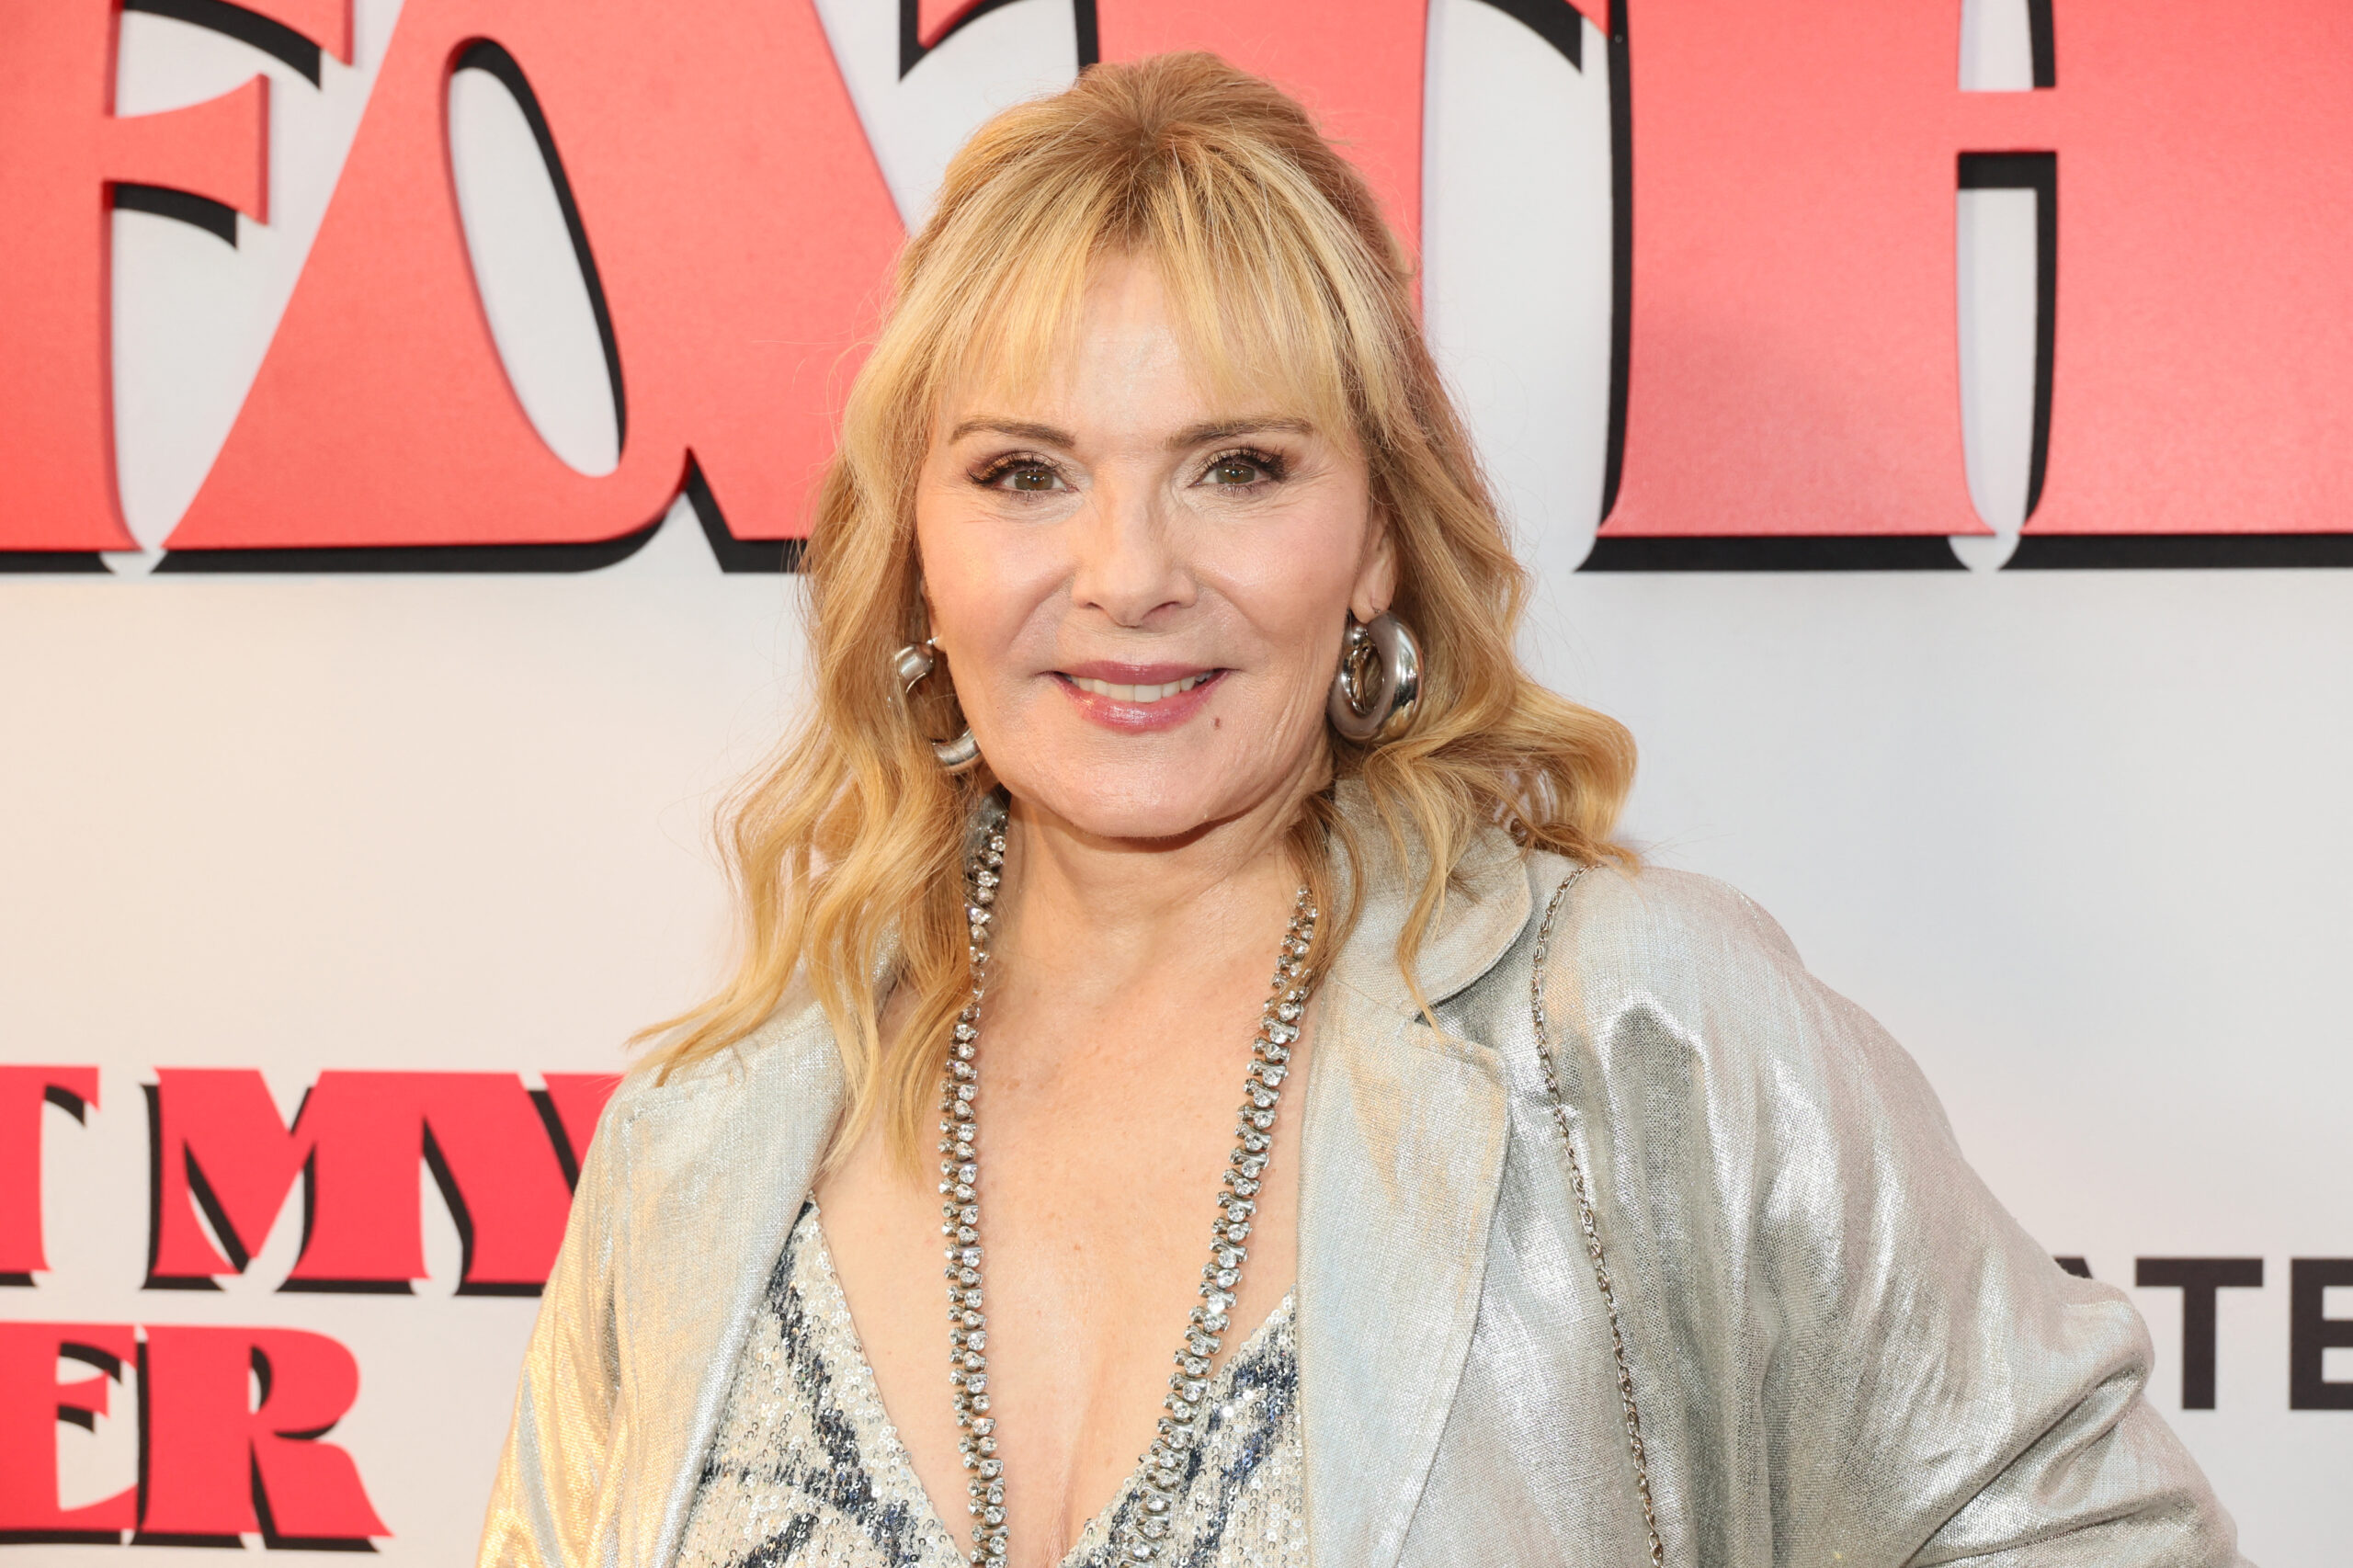 Samantha Jones, Kim Cattrall's beloved character from "Sex and the City," will make a shock (and very brief) return in the sequel to the cult series